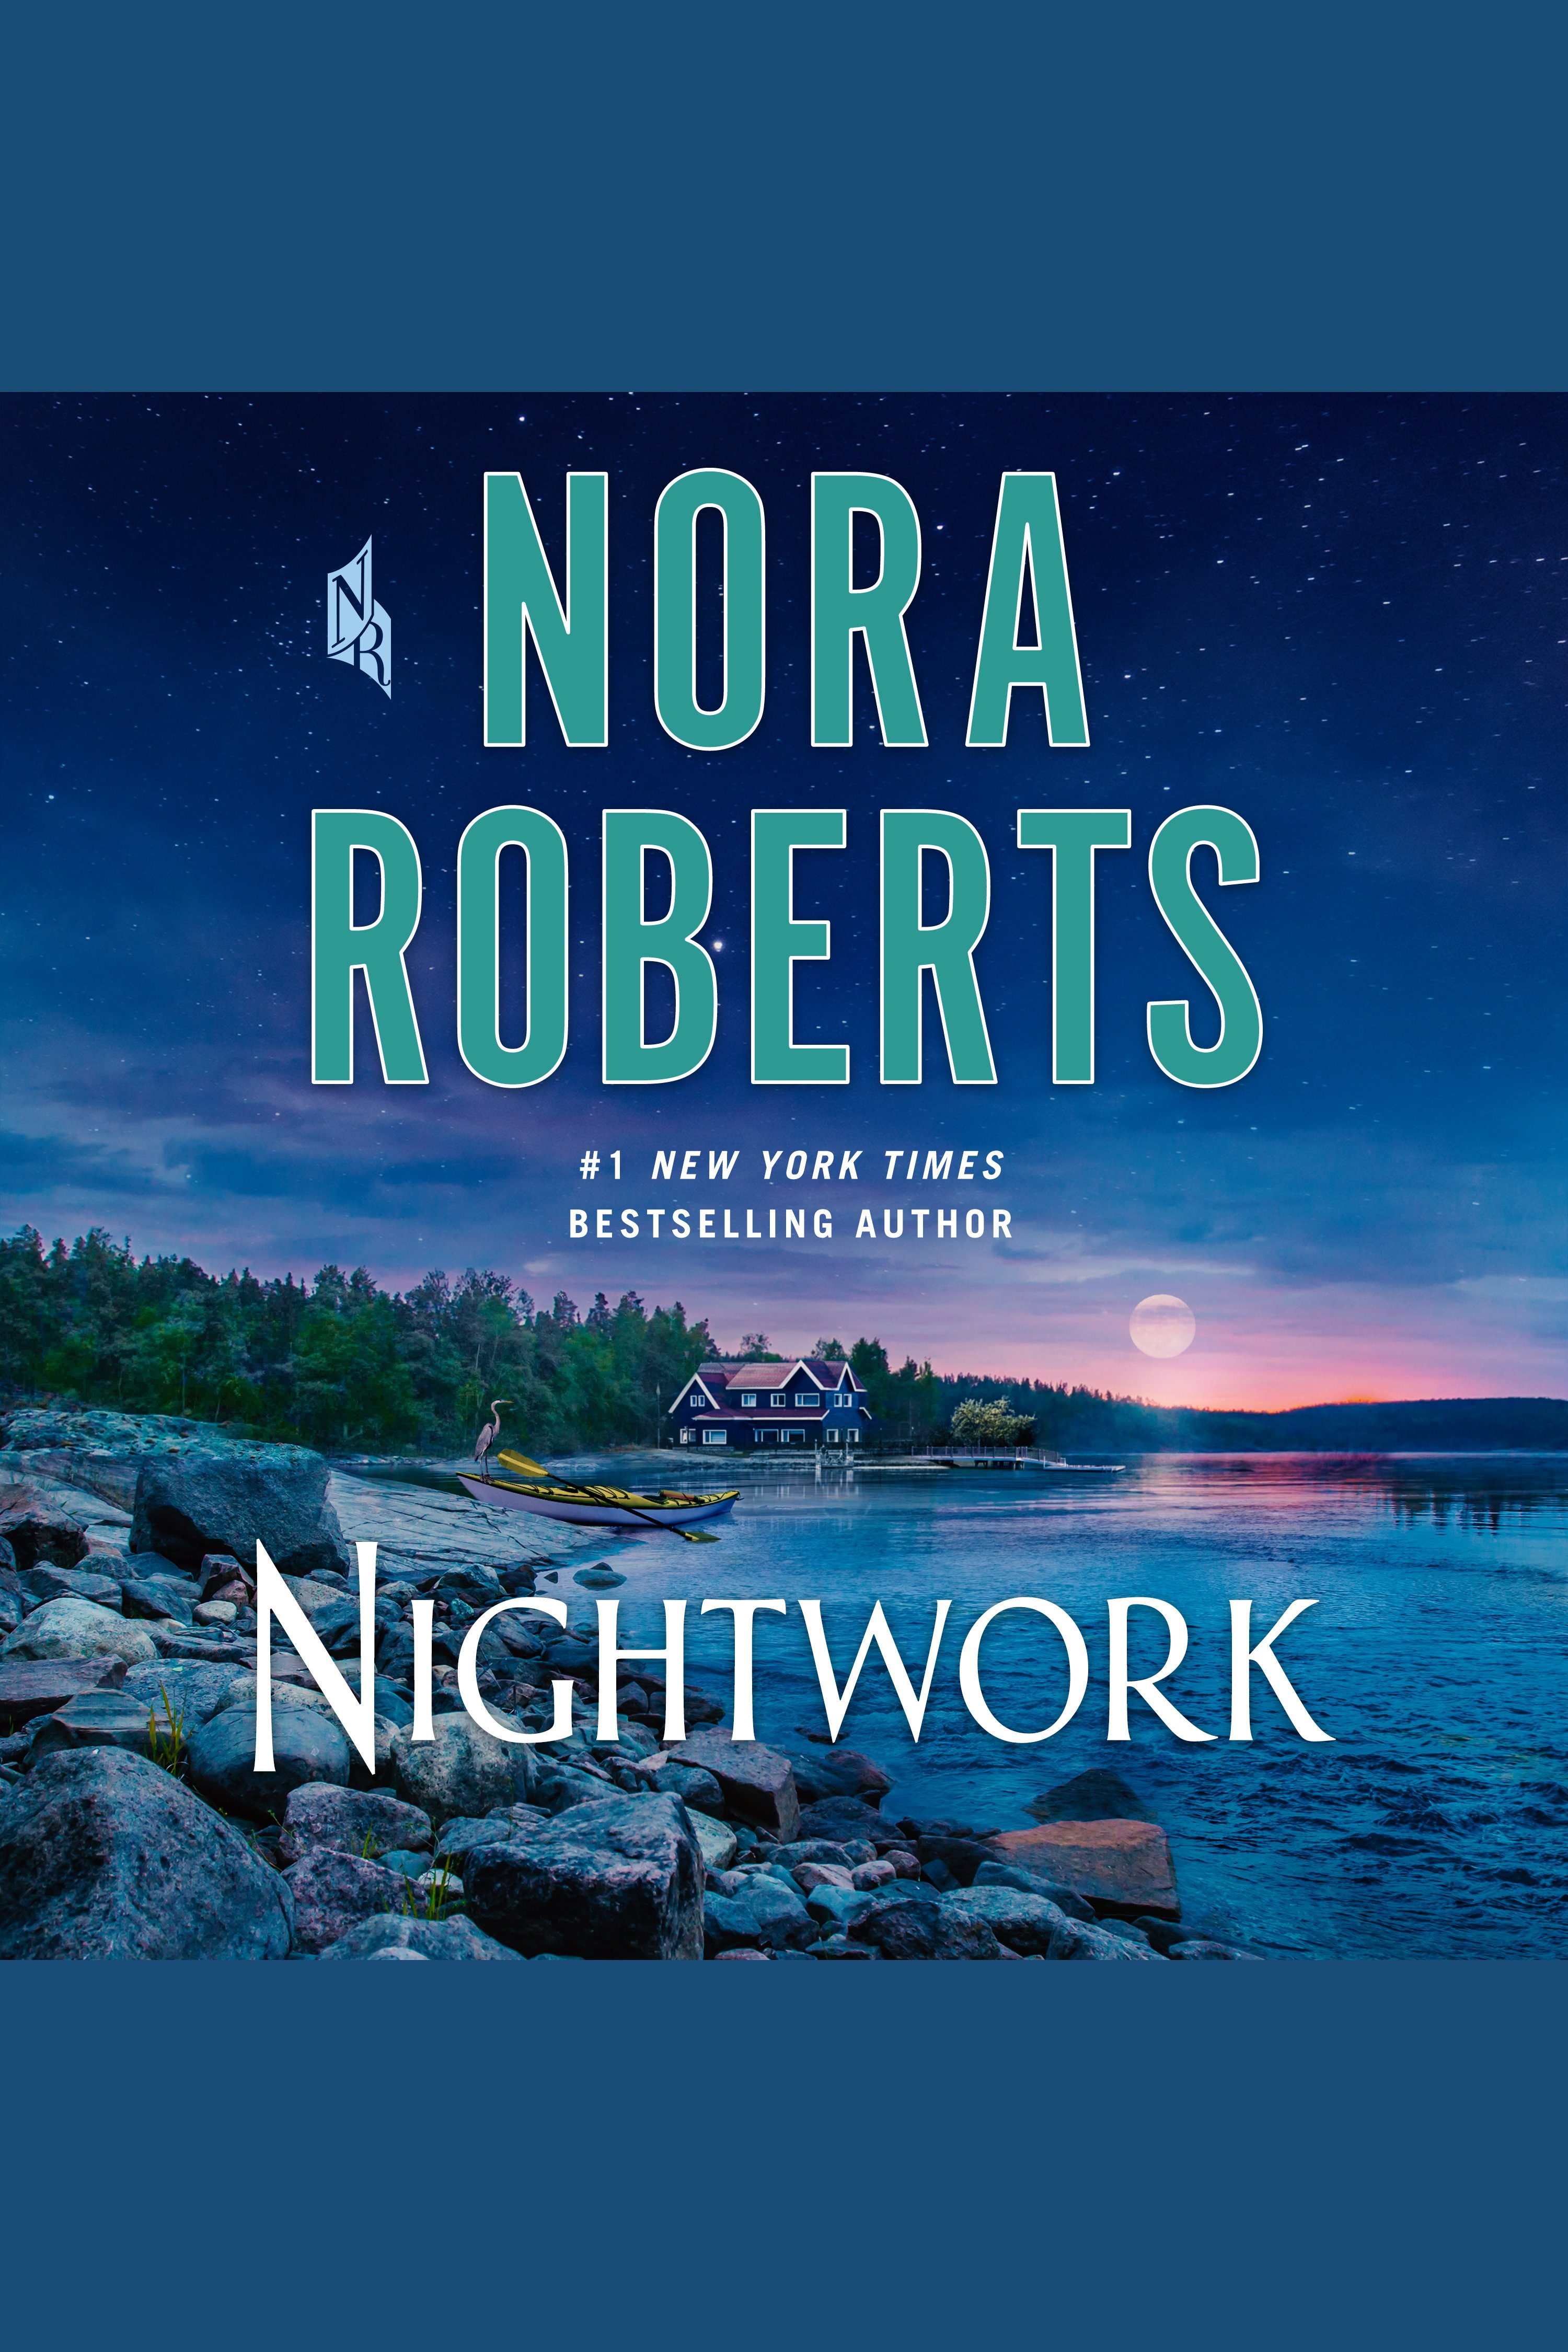 Nightwork cover image